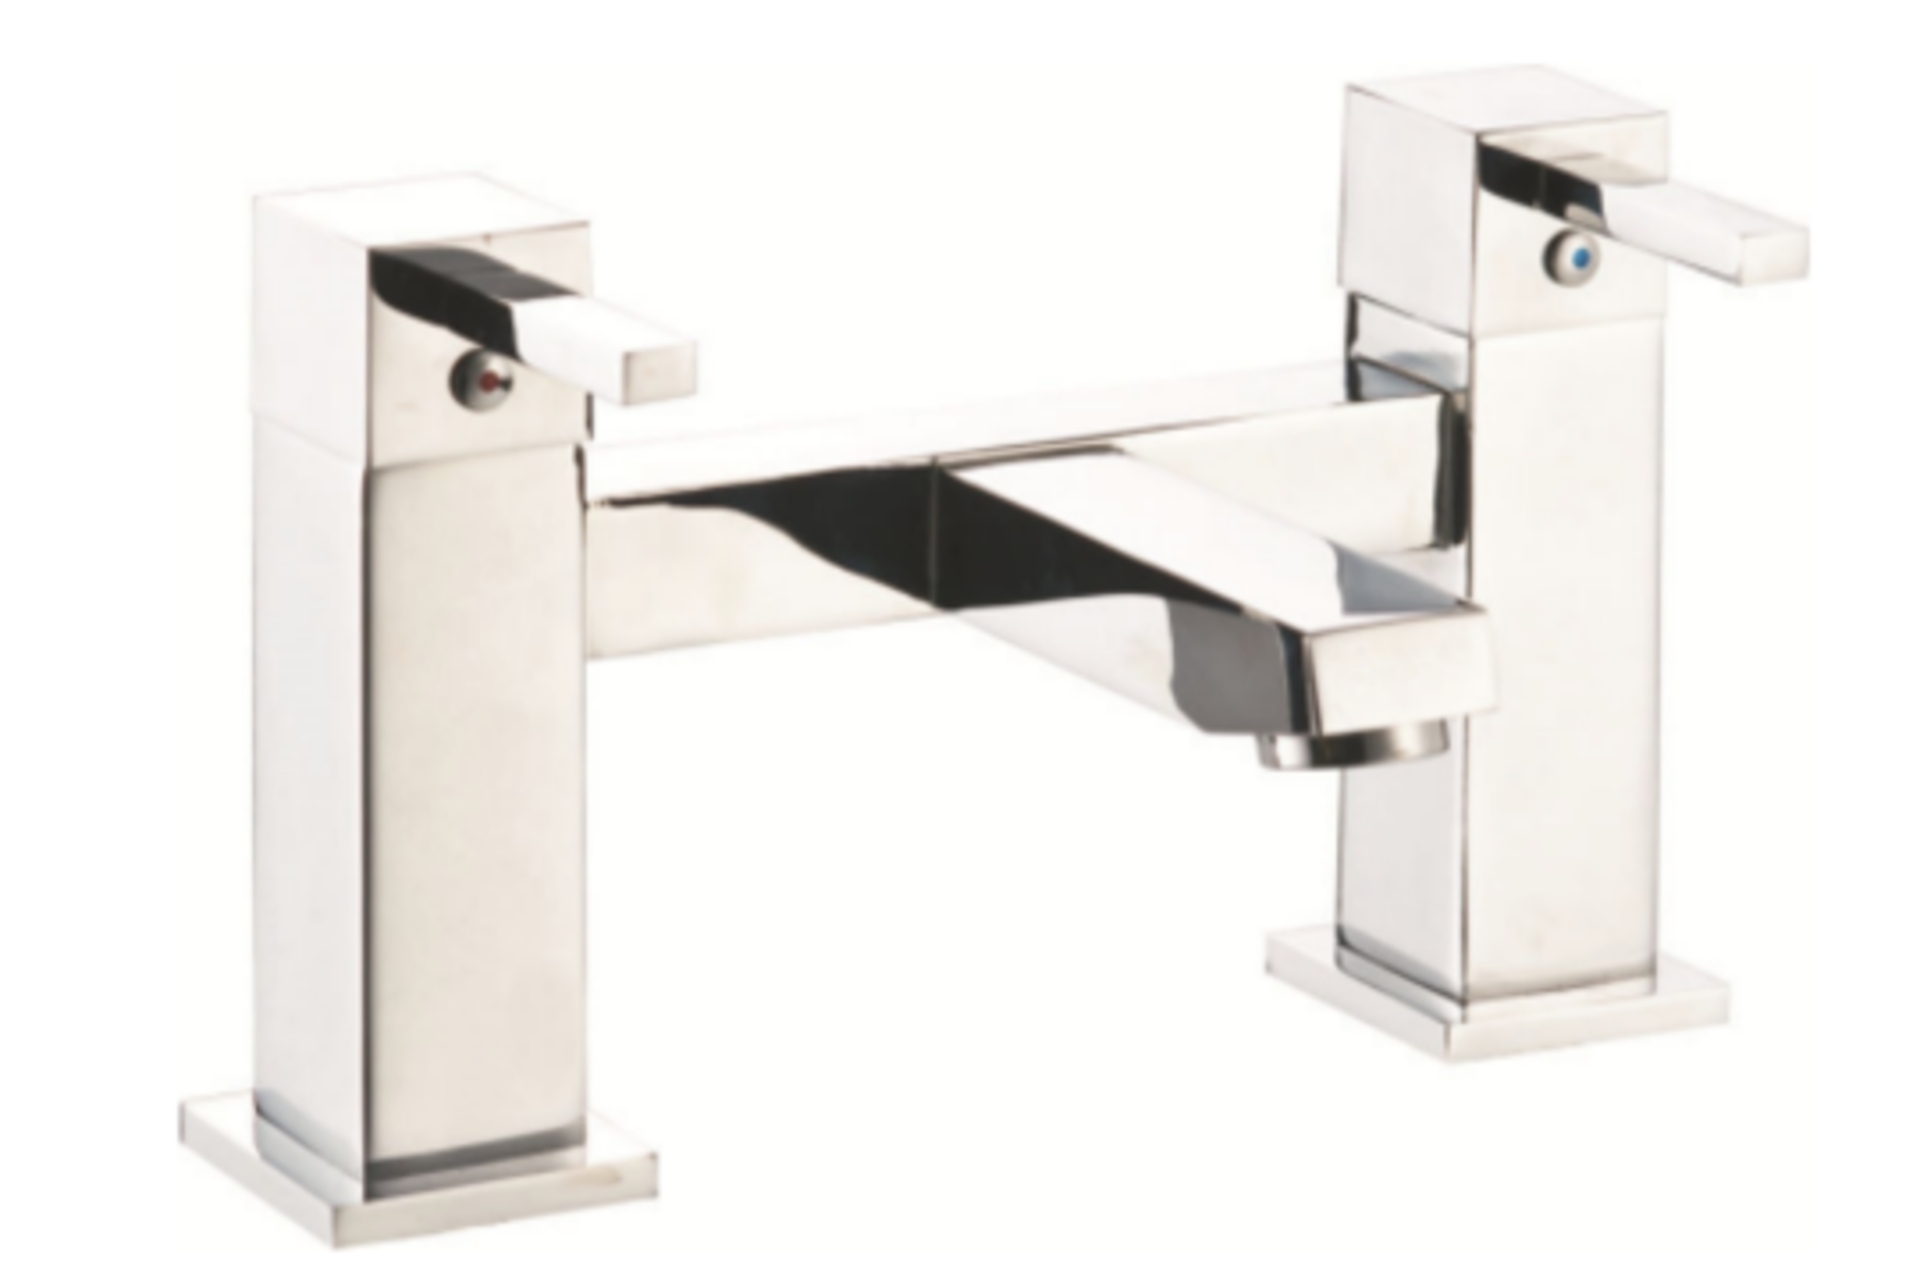 12 x NEW BOXED Abode Lamona CONTEMPORARY CHROME BATH TAPS. RRP £129.99 EACH, GIVING THIS LOT A TOTAL